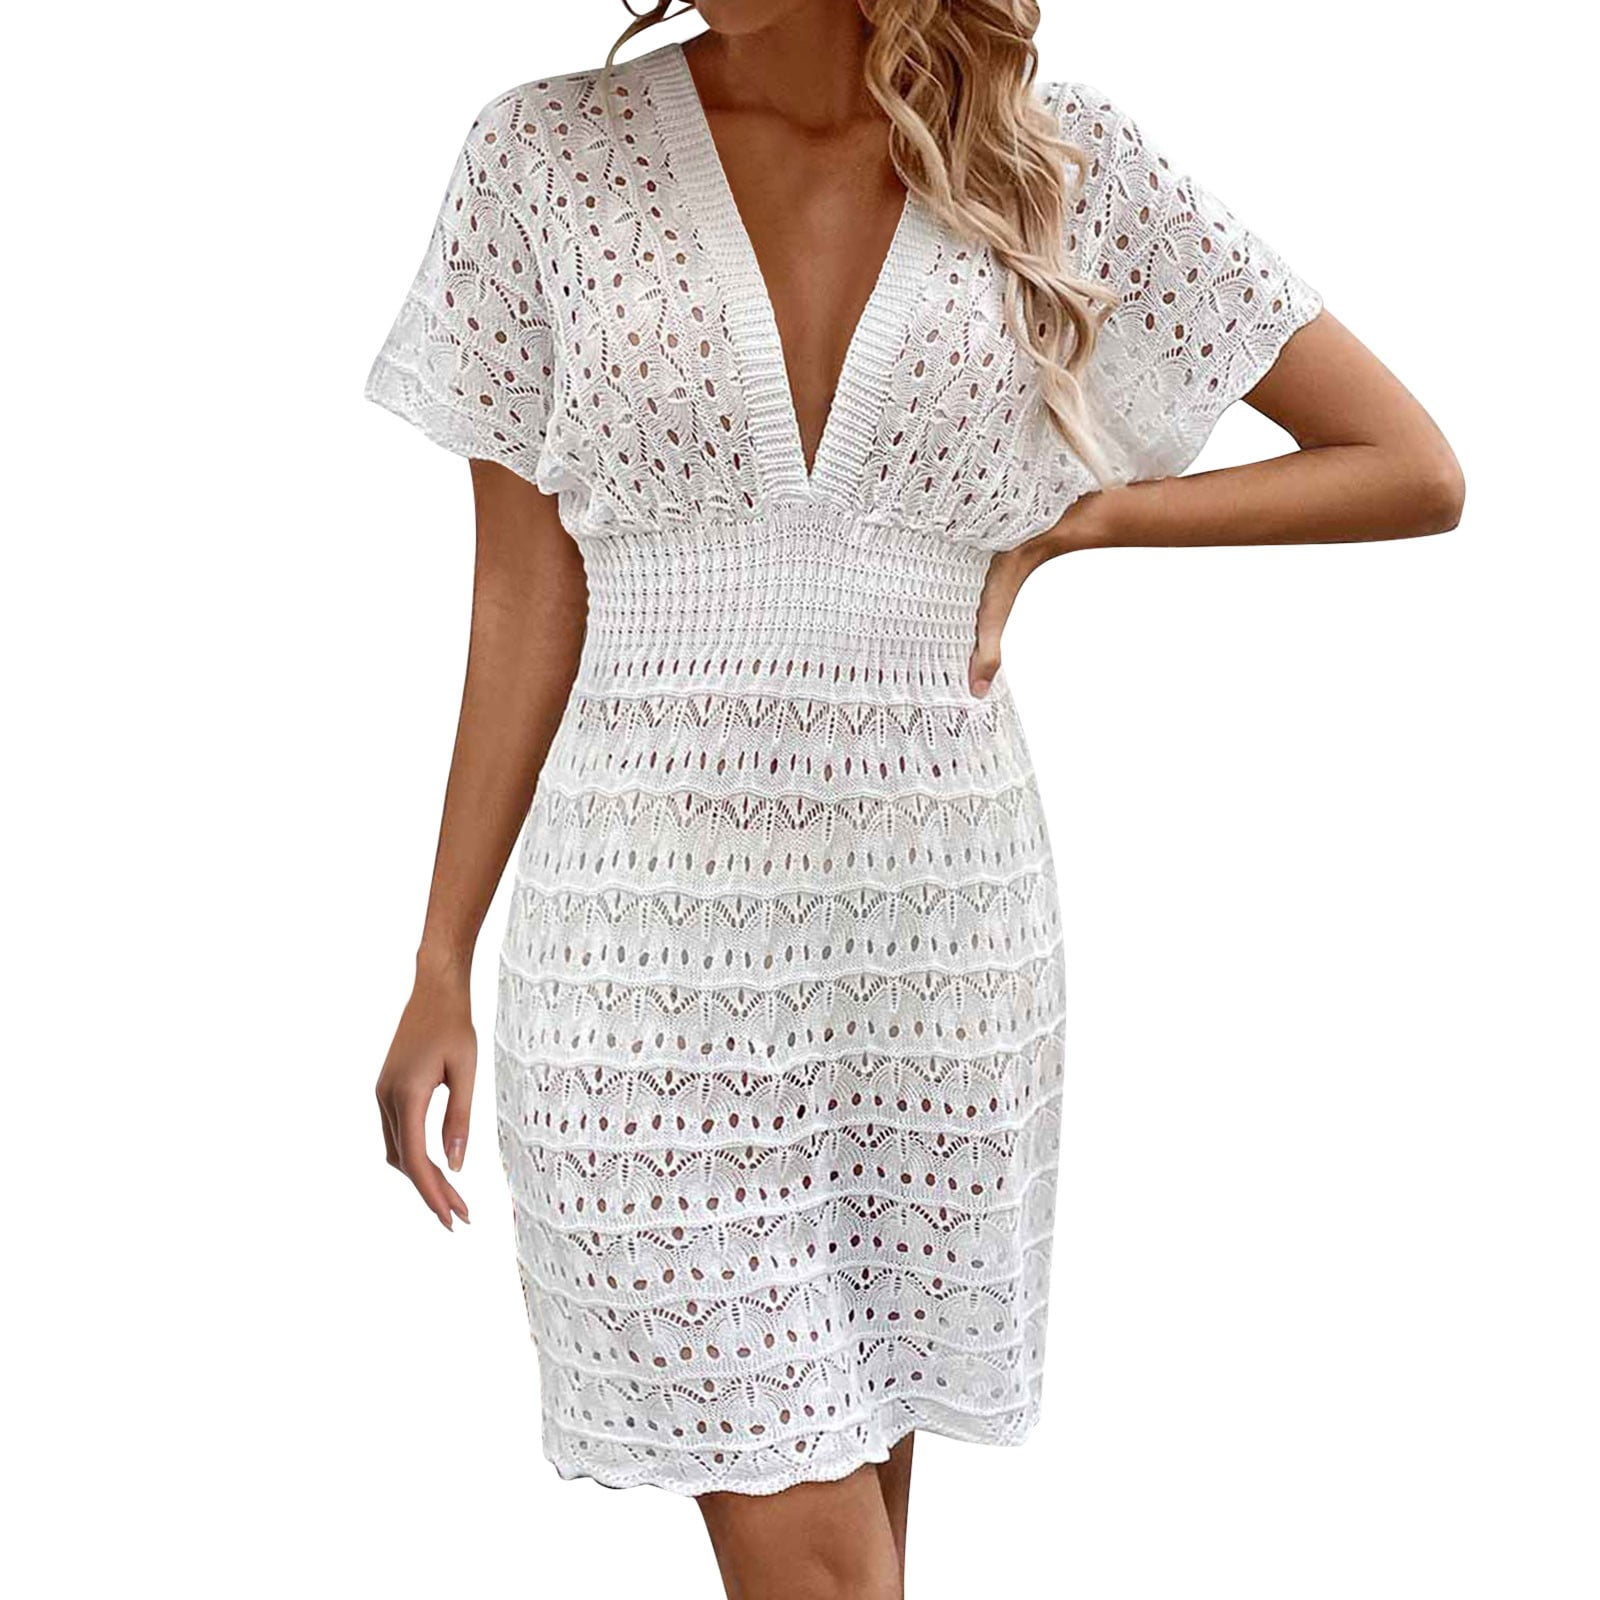 GAQLIVE Swimsuit Cover Ups Dress Deep V Neck Beach Dresses Hollow Out Wave Pattern Crochet ...